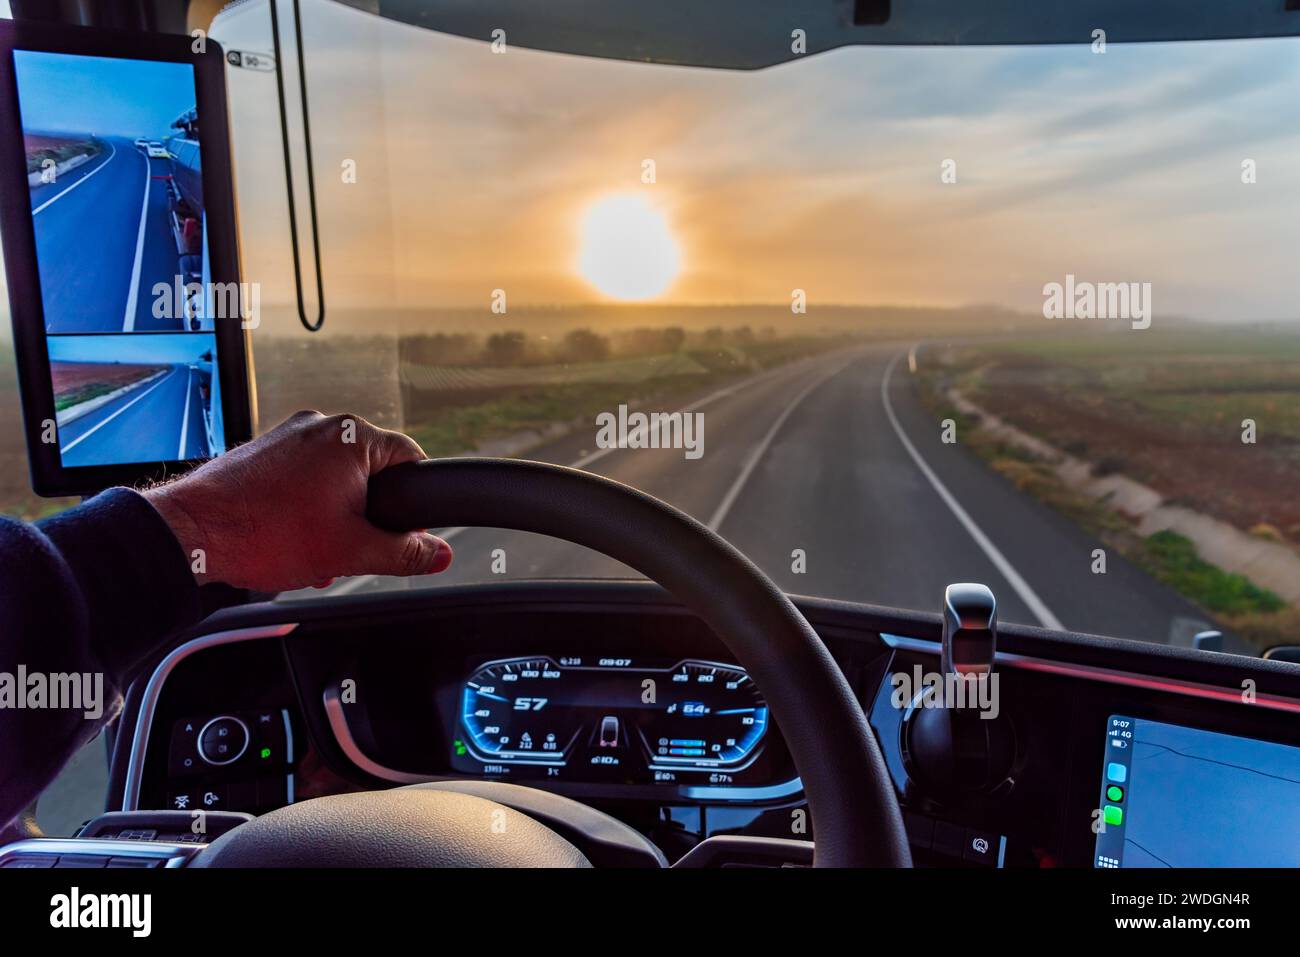 View from the driver's seat of a truck with camera rearview mirrors of a conventional road at dawn. Stock Photo